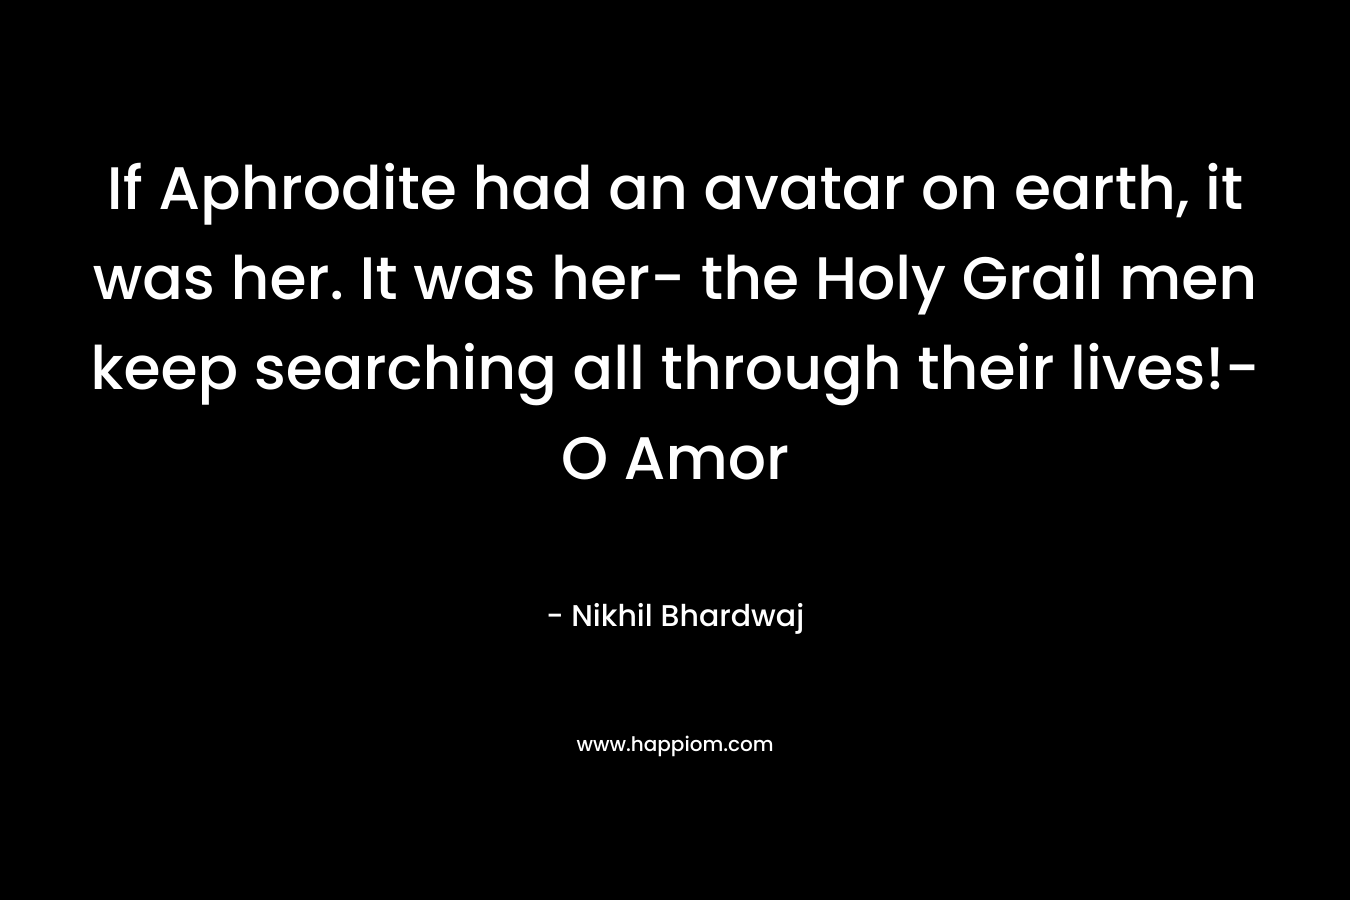 If Aphrodite had an avatar on earth, it was her. It was her- the Holy Grail men keep searching all through their lives!- O Amor – Nikhil Bhardwaj